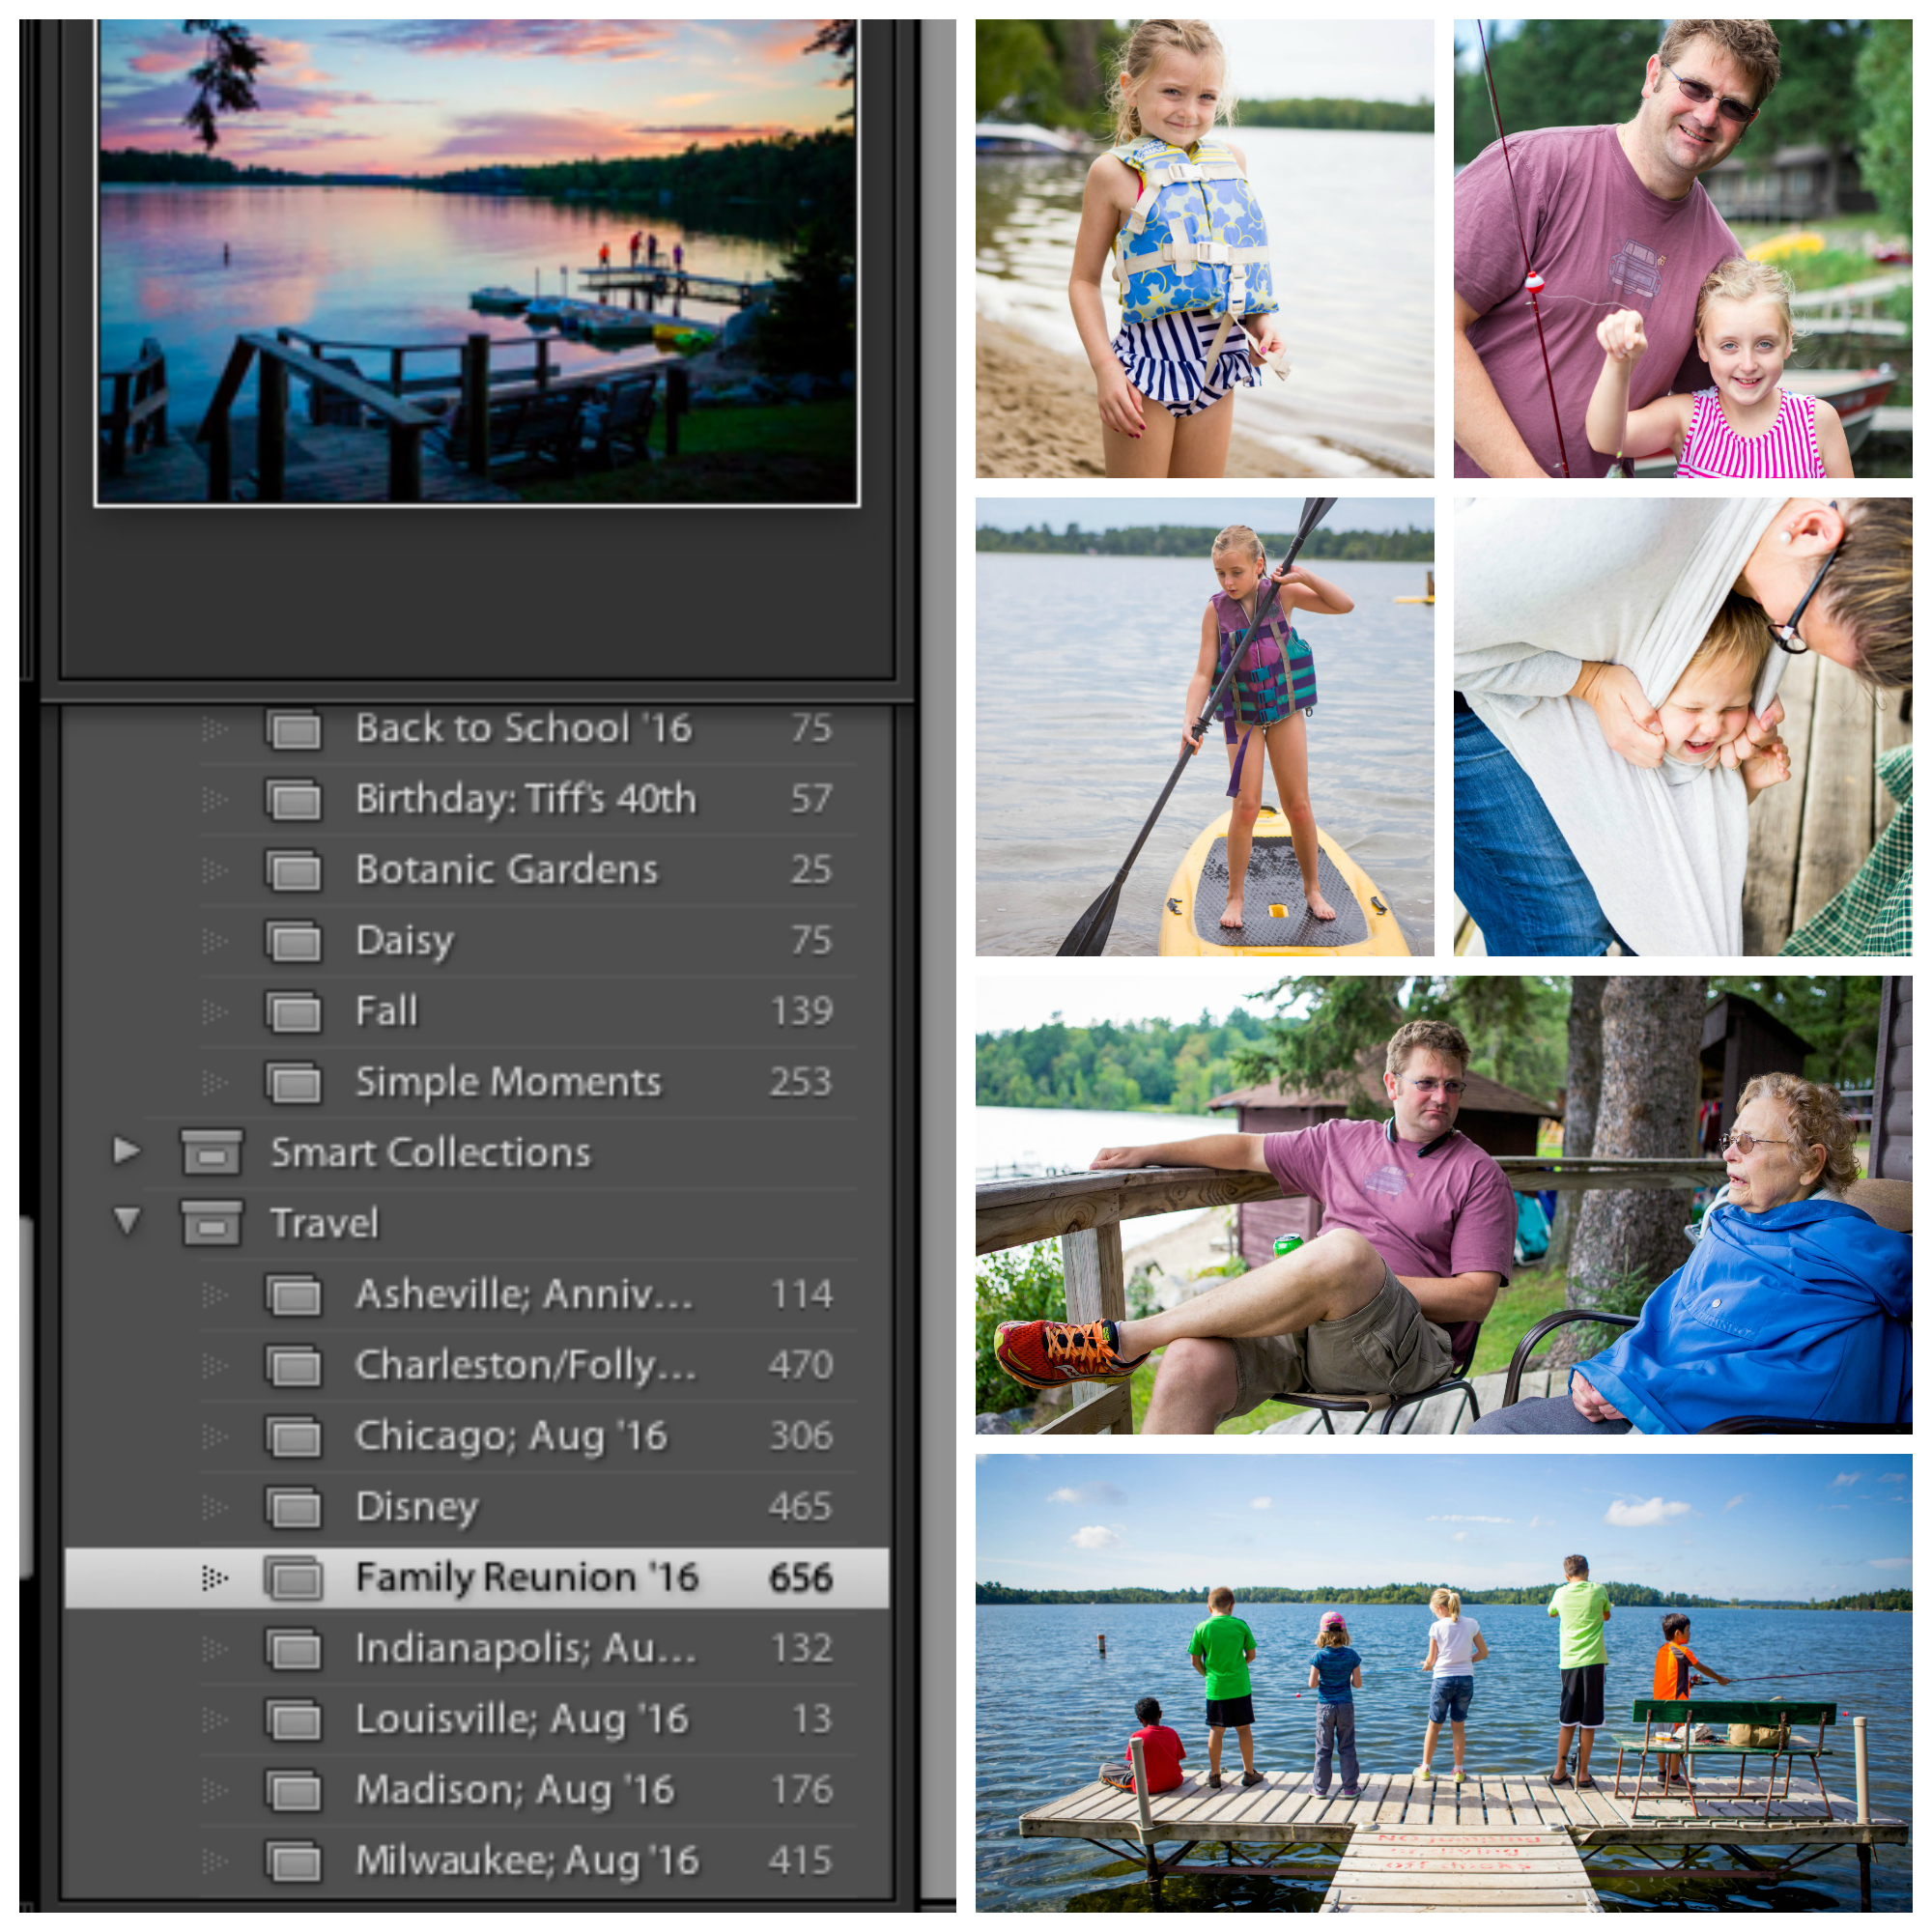 Lightroom: The best photo editing software for moms